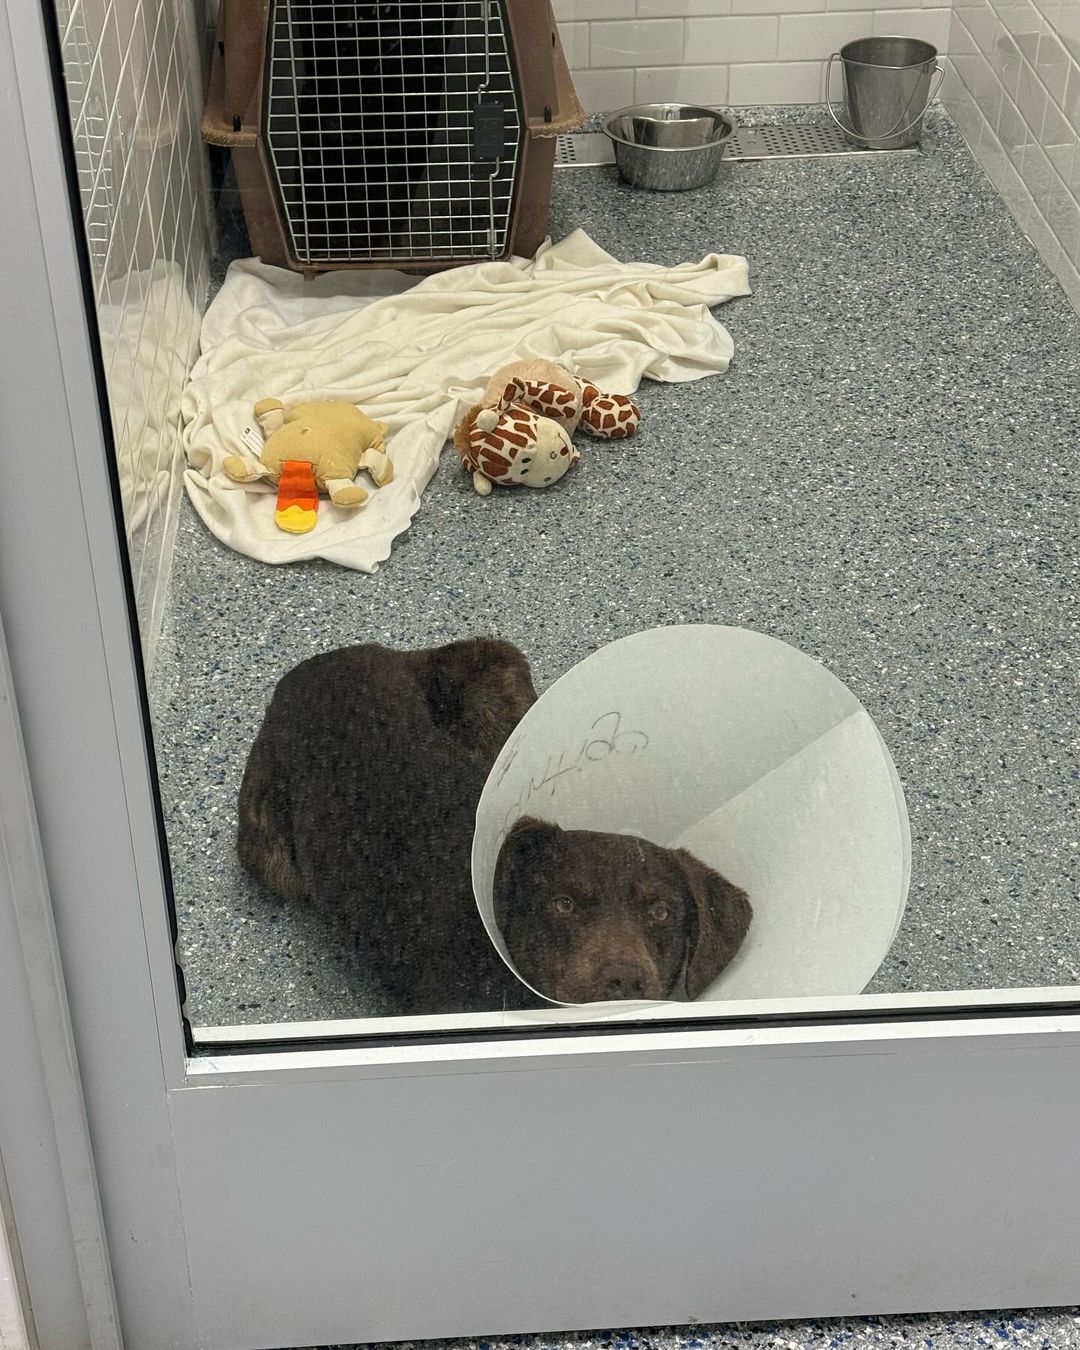 shelter dog wearing a cone